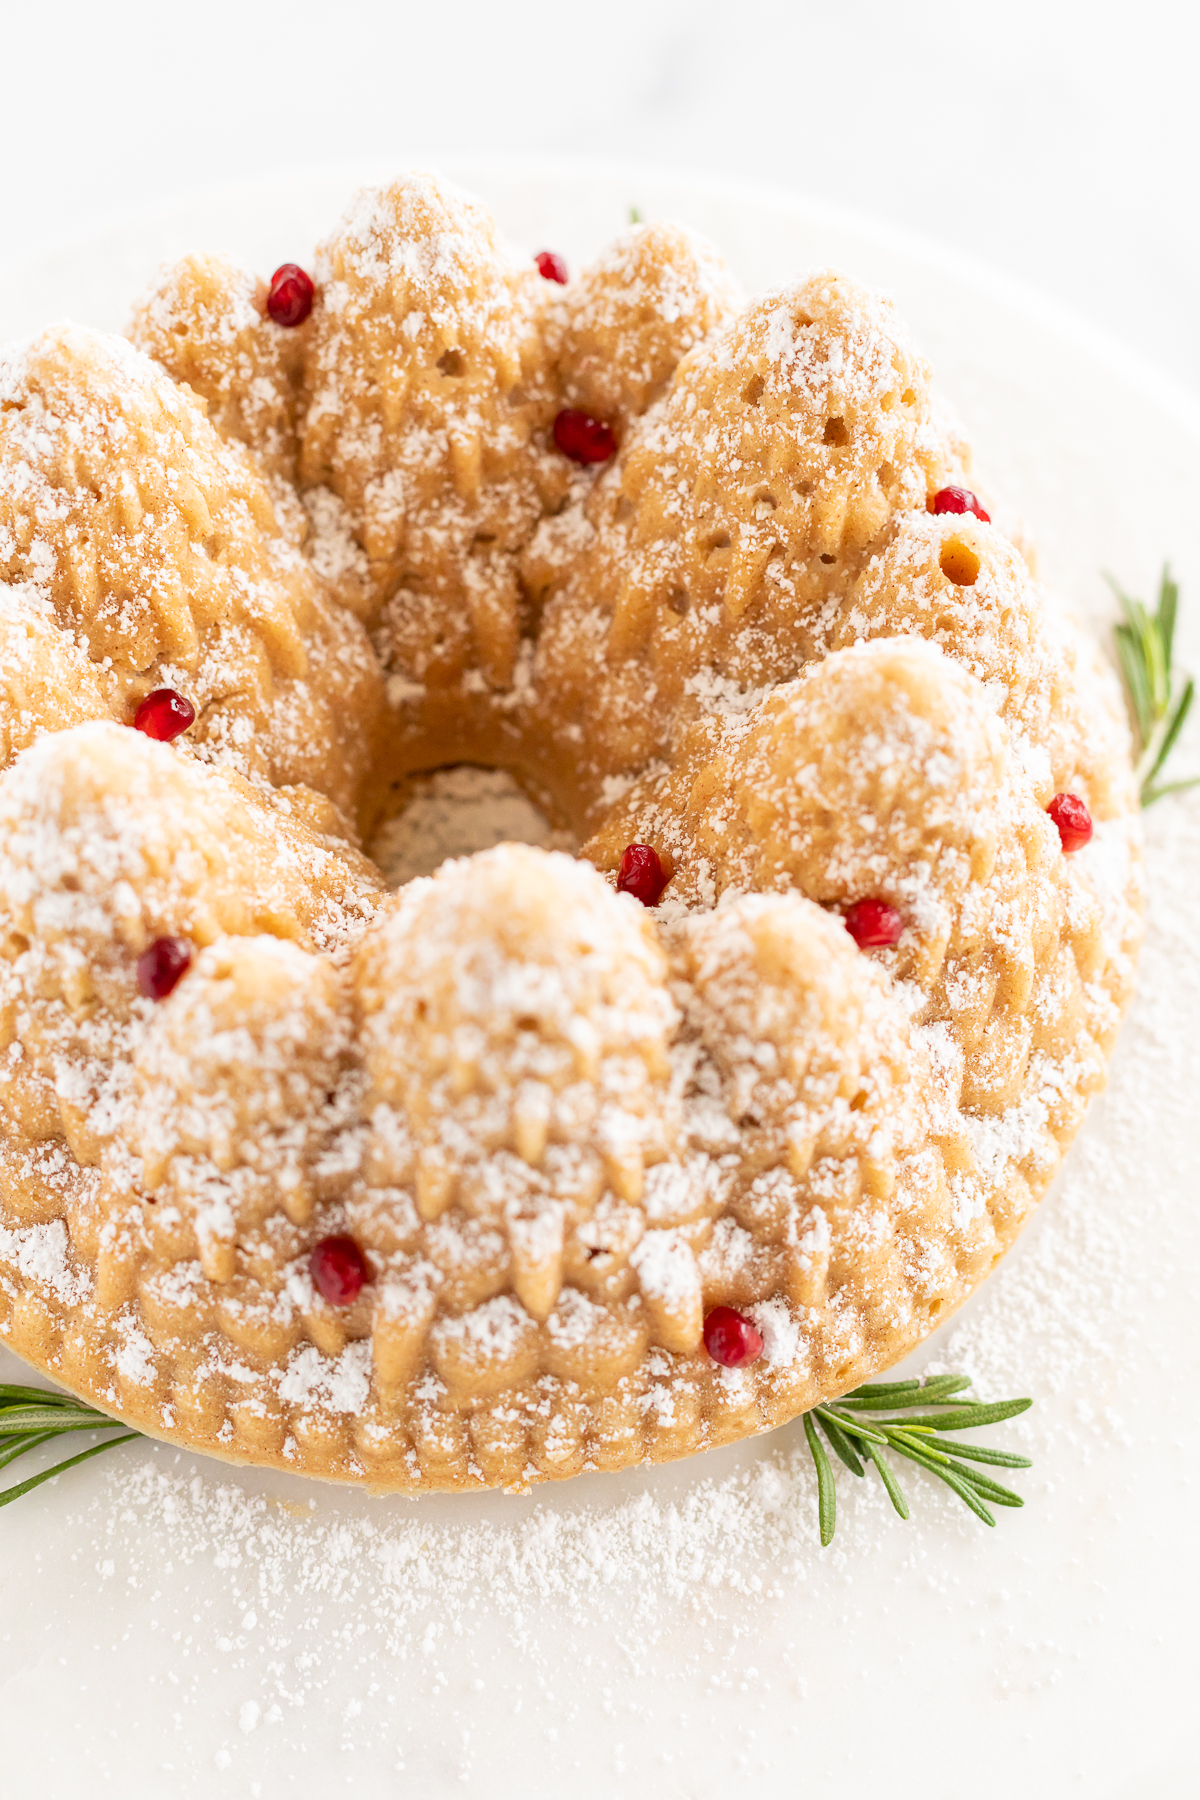 A Christmas bundt cake topped with powdered sugar and a sprig of rosemary.